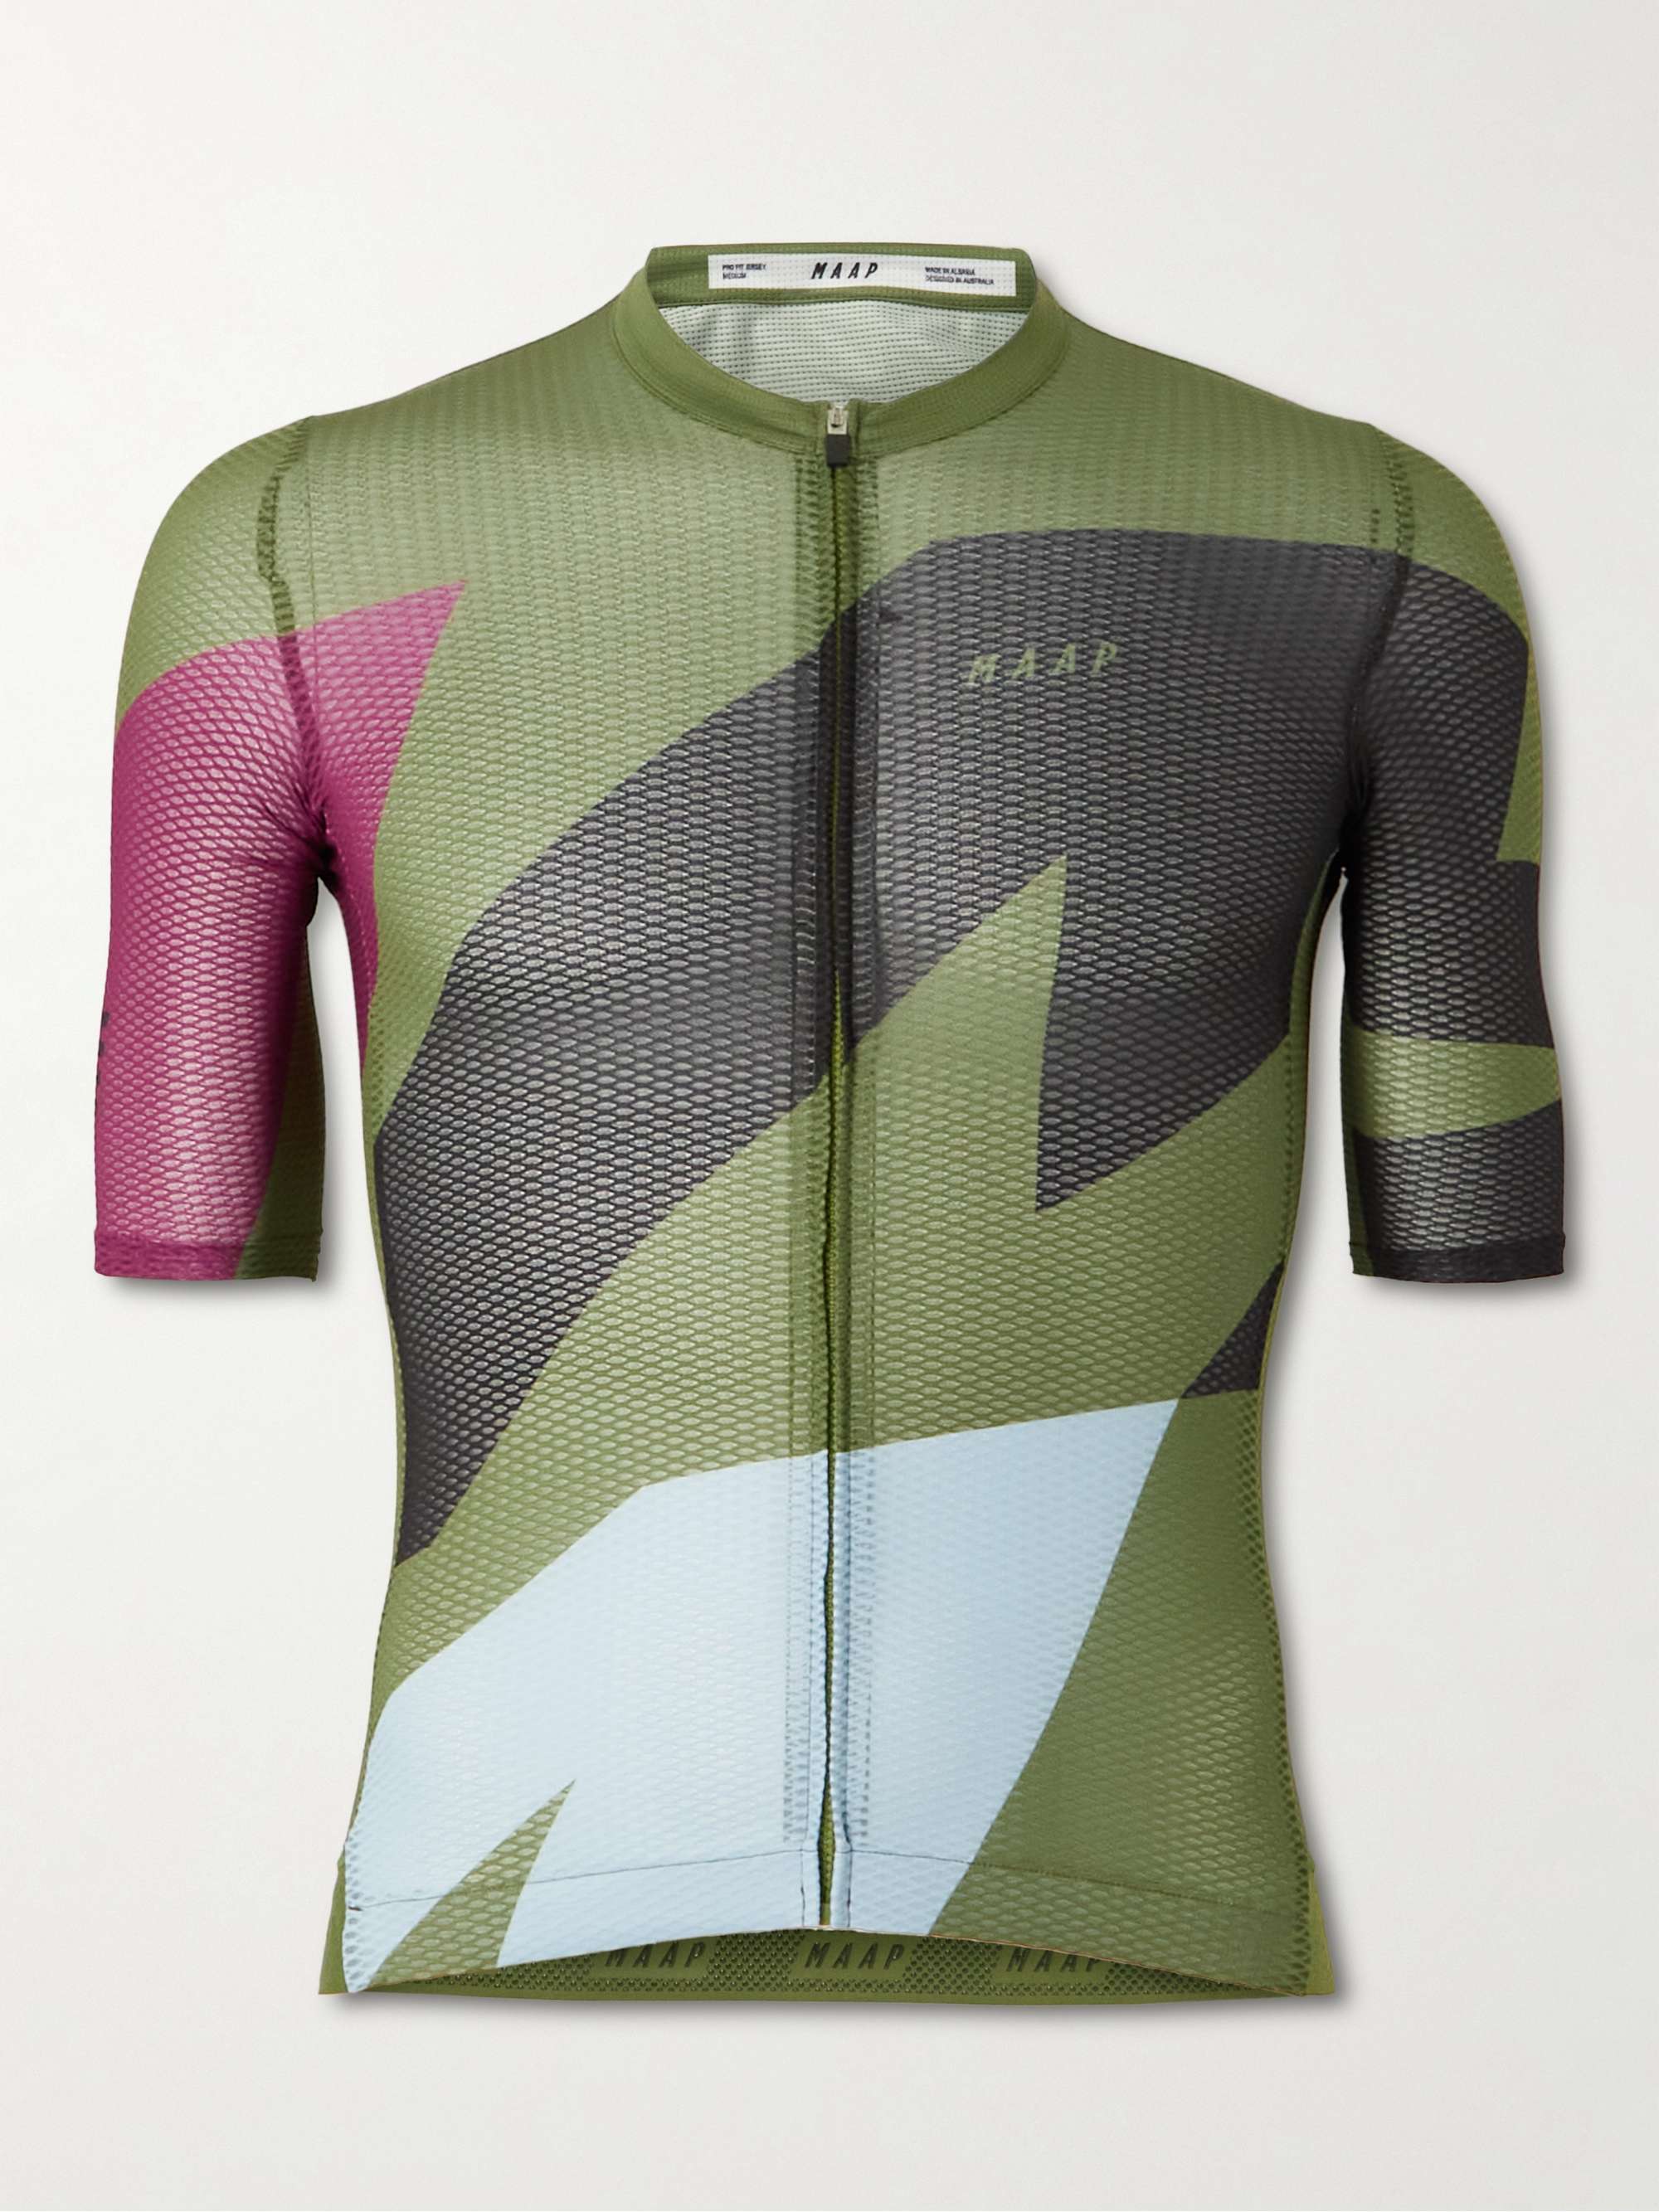 MAAP Emerge Ultralight Pro Printed Recycled Stretch-Mesh Cycling Jersey for  Men MR PORTER